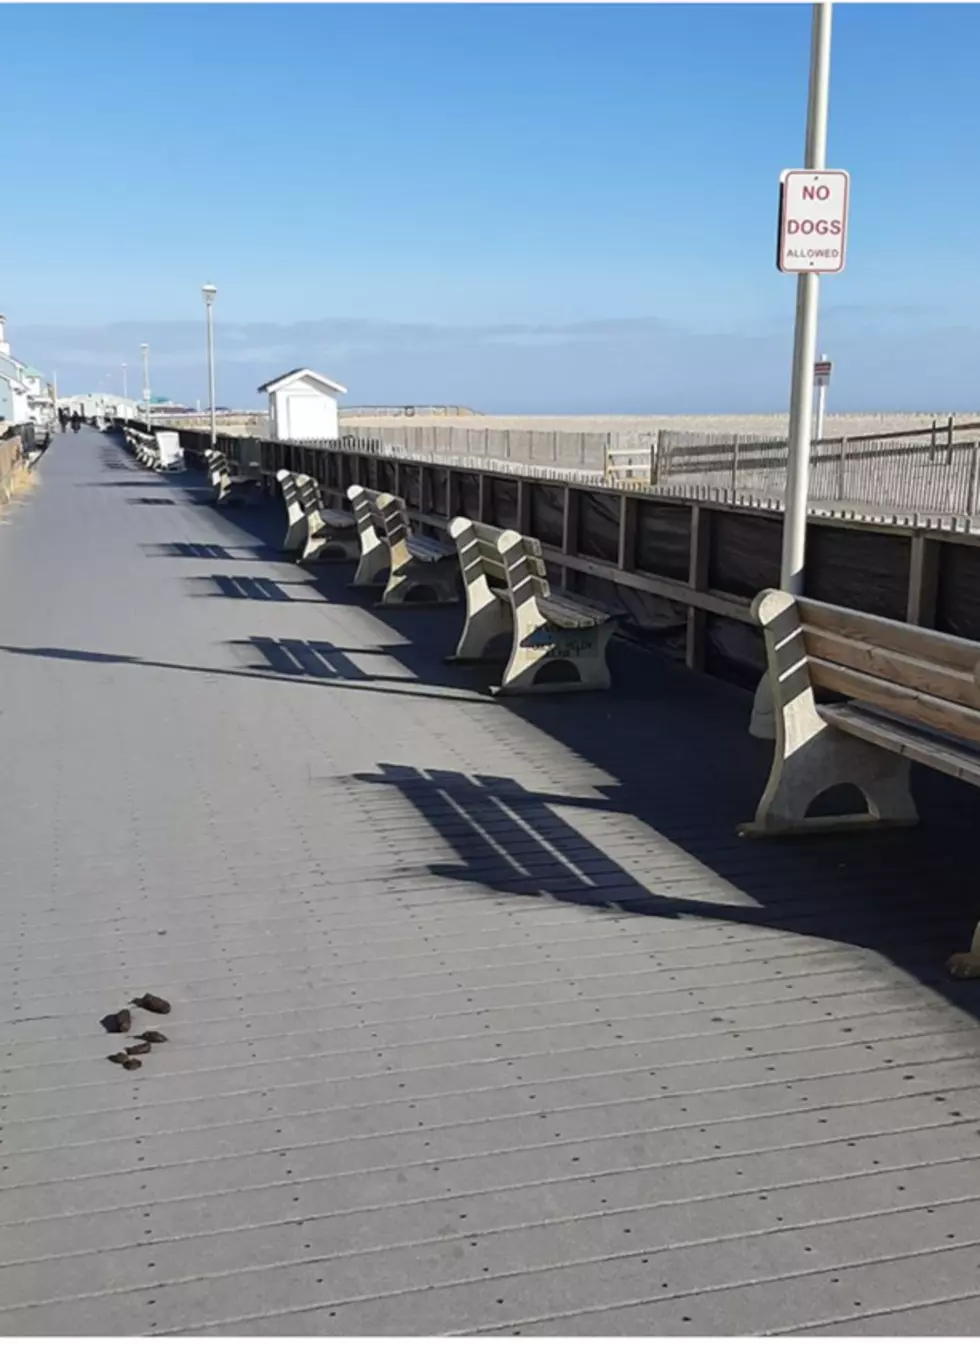 Pick up your dog’s poop! Point Pleasant Beach Police are cracking down